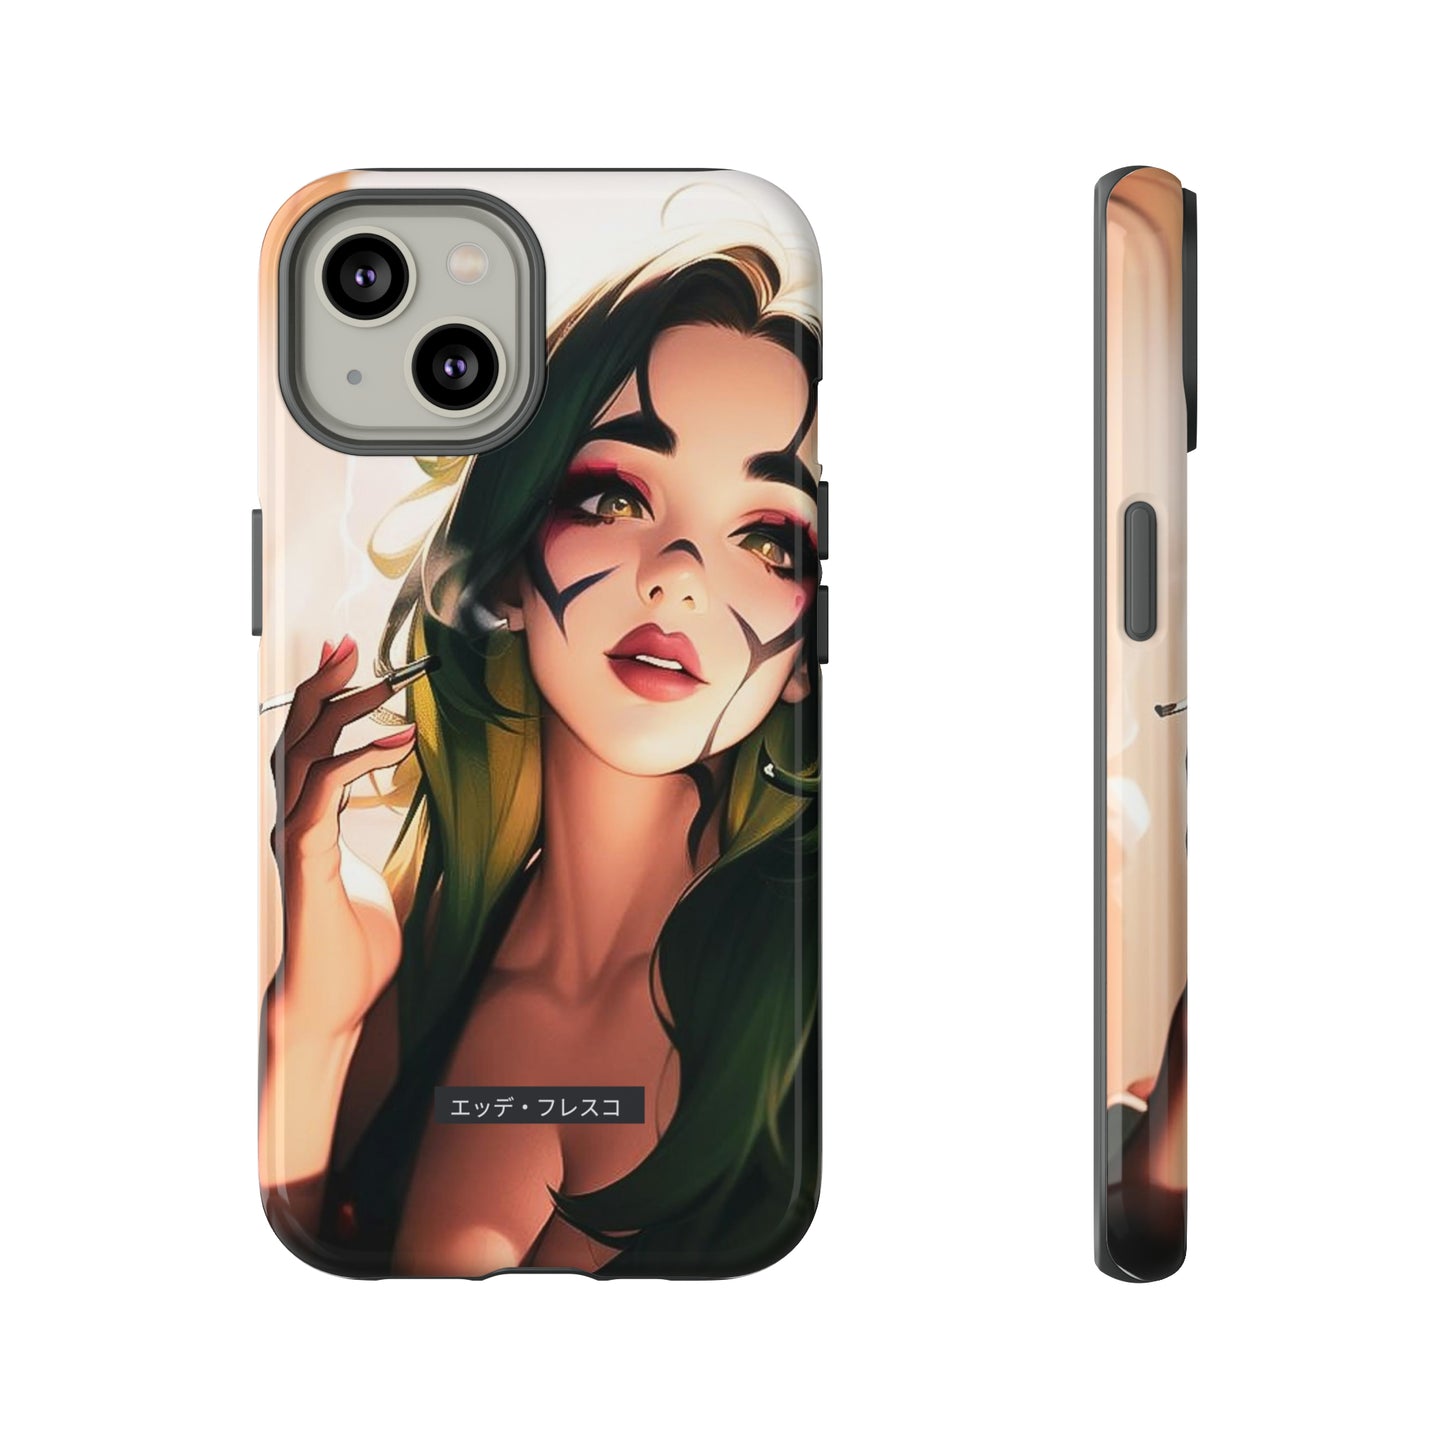 Anime Style Art Tough Cases- "My Wife is Always Smiling 2"